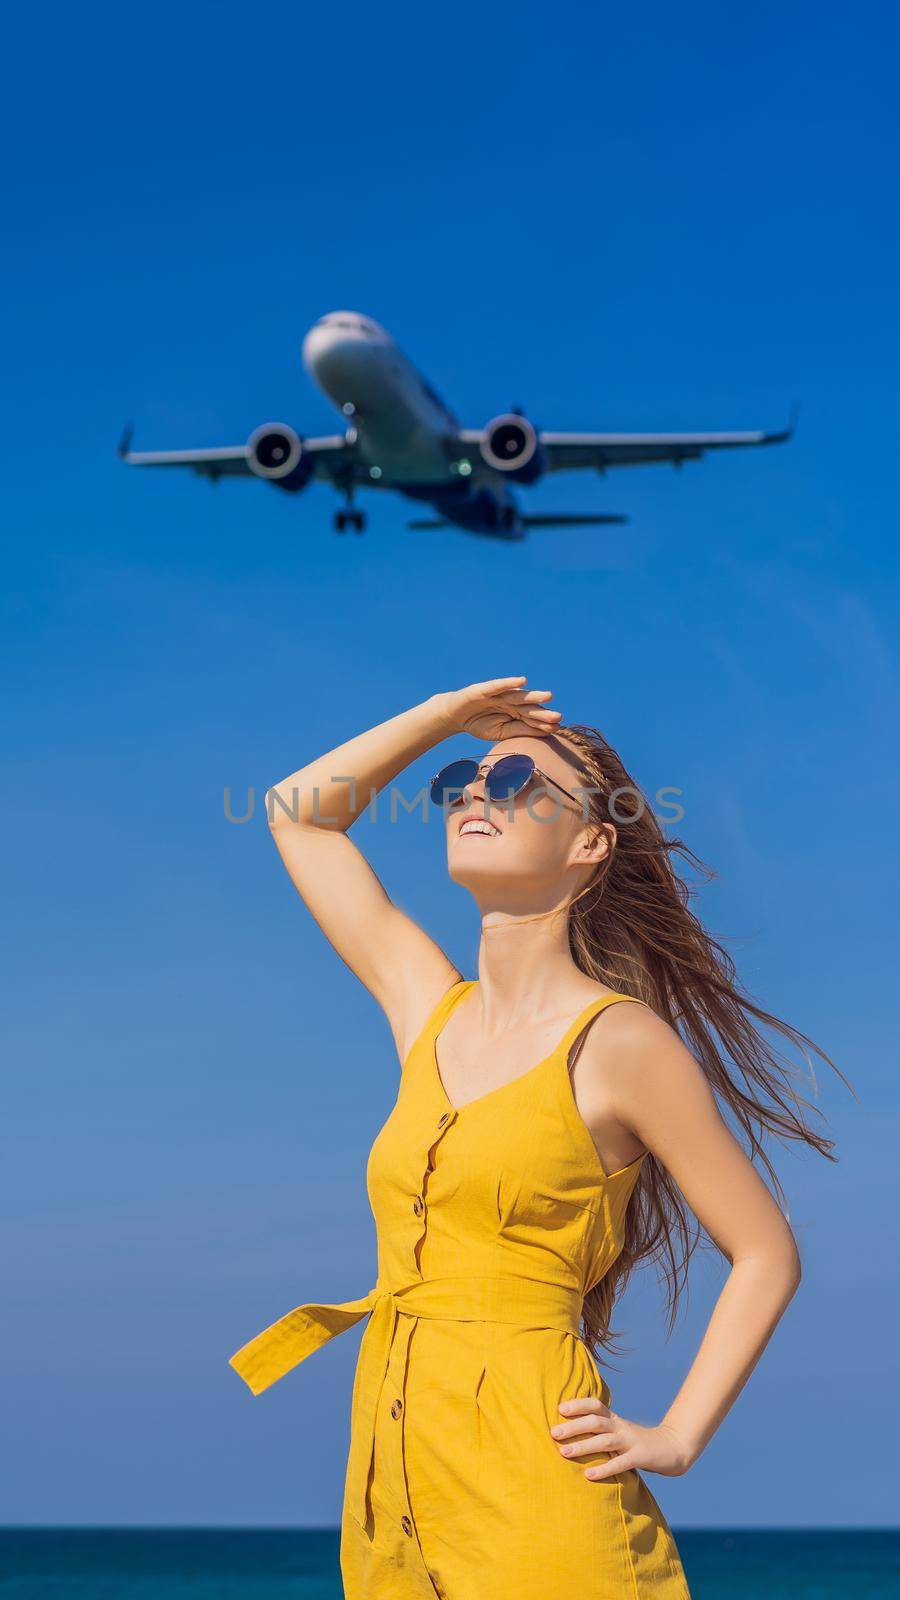 Woman have fun on the beach watching the landing planes. Traveling on an airplane concept. Text space. Island Phuket in Thailand. Impressive paradise. Hot beach Mai Khao. Amazing landscape. VERTICAL FORMAT for Instagram mobile story or stories size. Mobile wallpaper